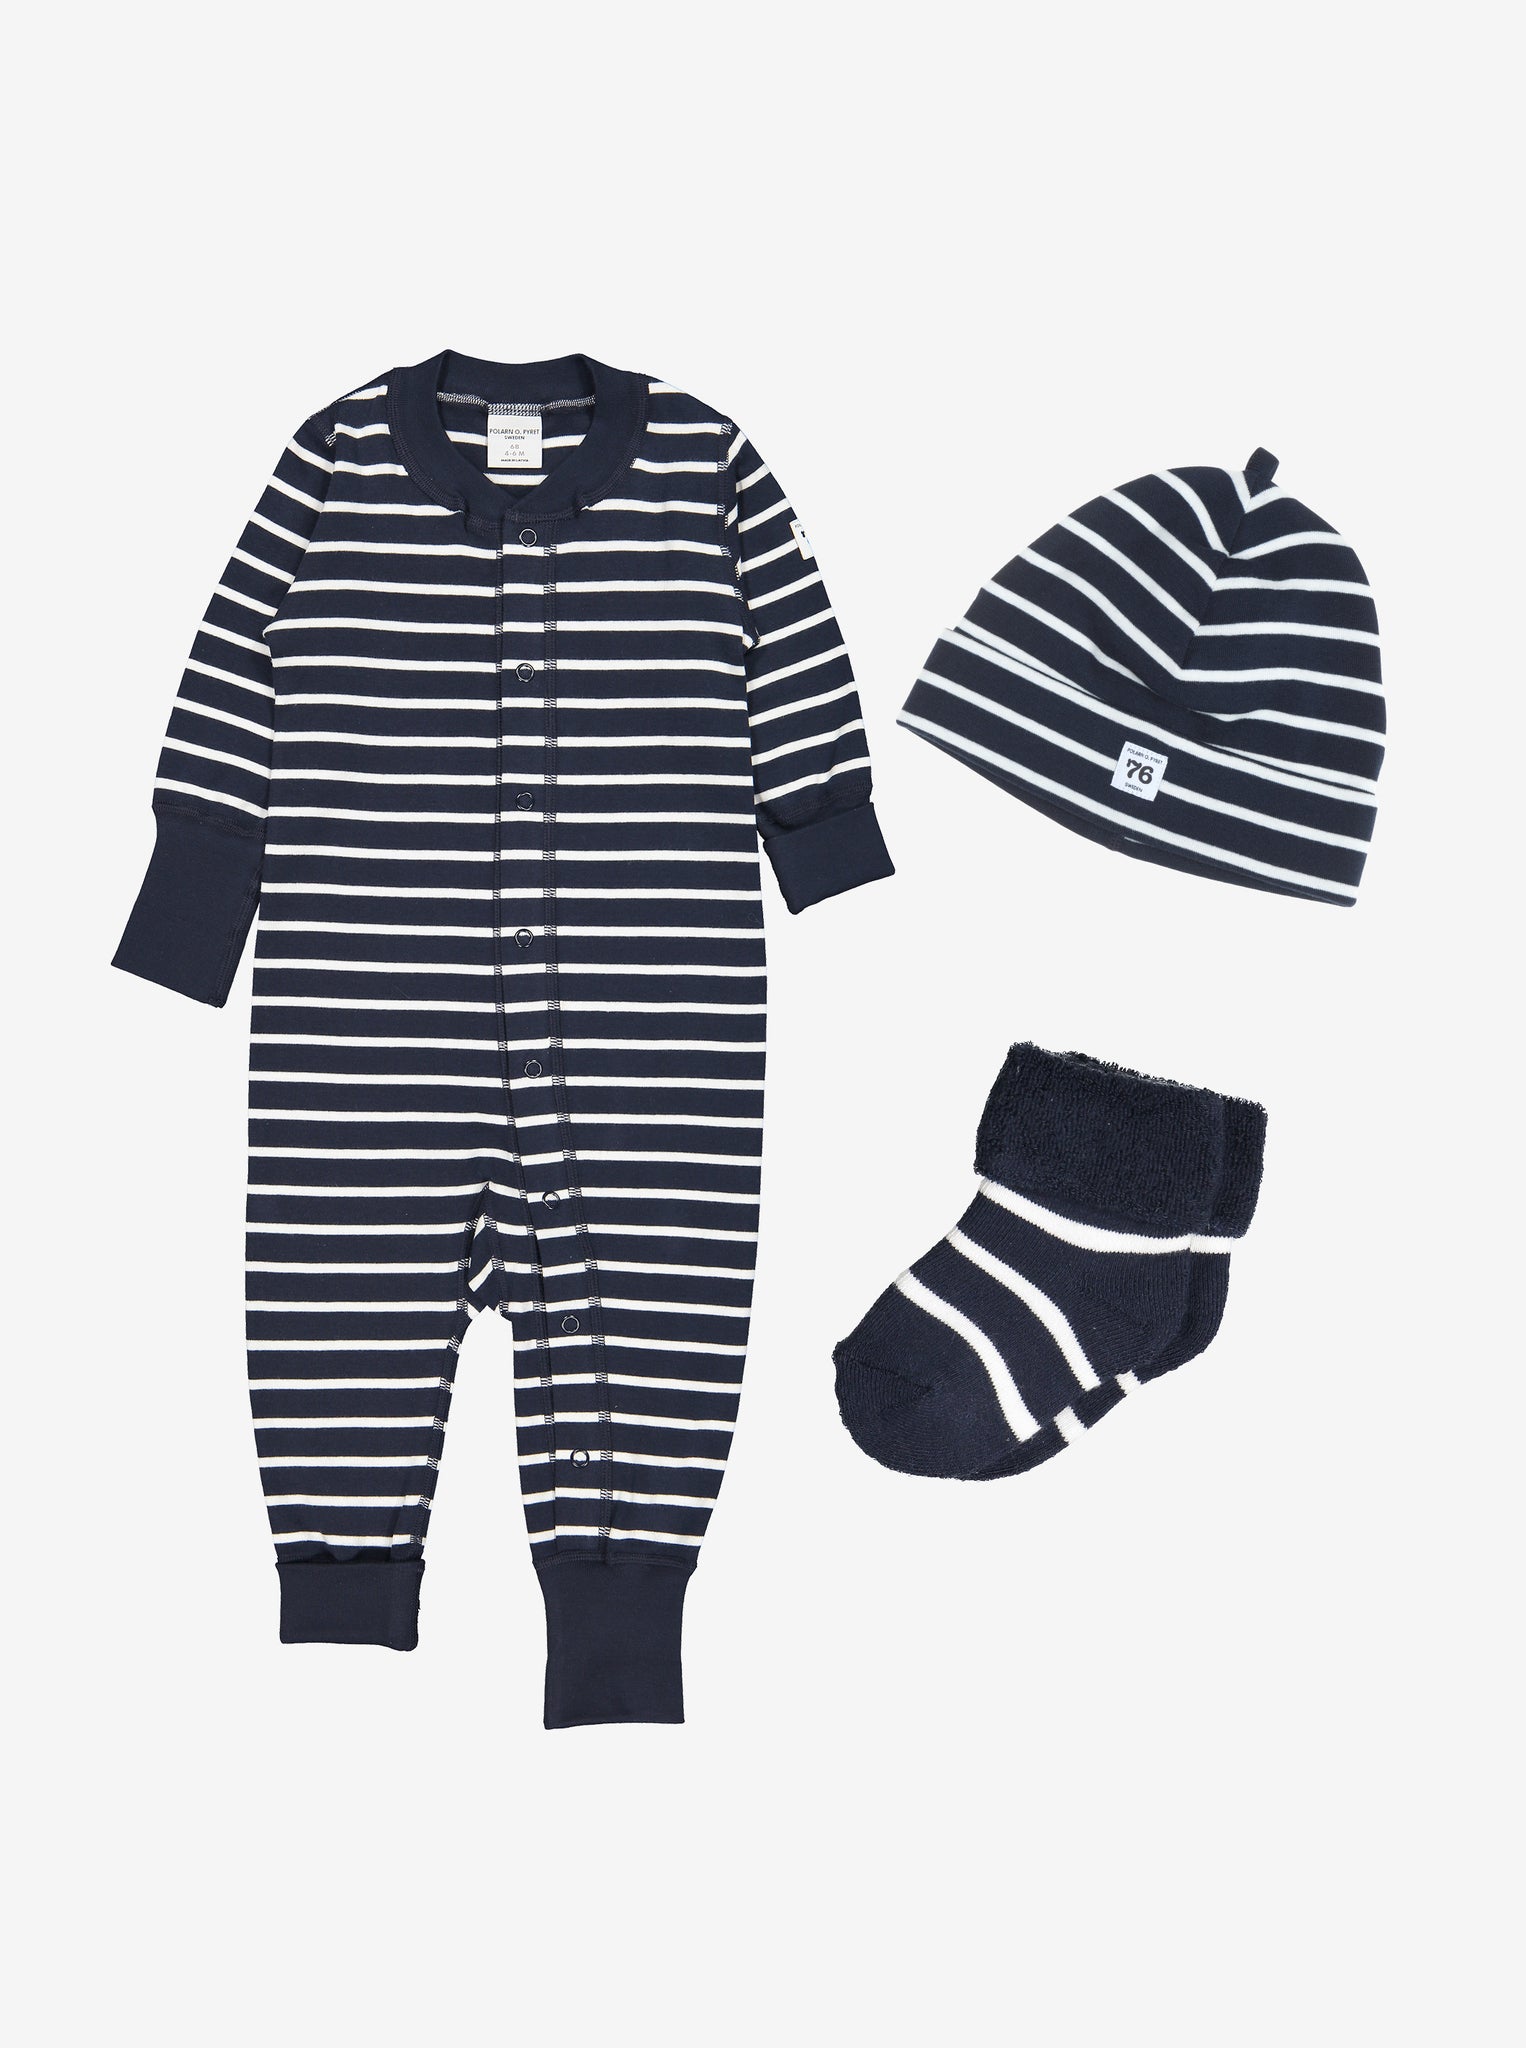 PO.P classic newborn baby set in navy and whitein cluding sleepsuit, hat and baby socks